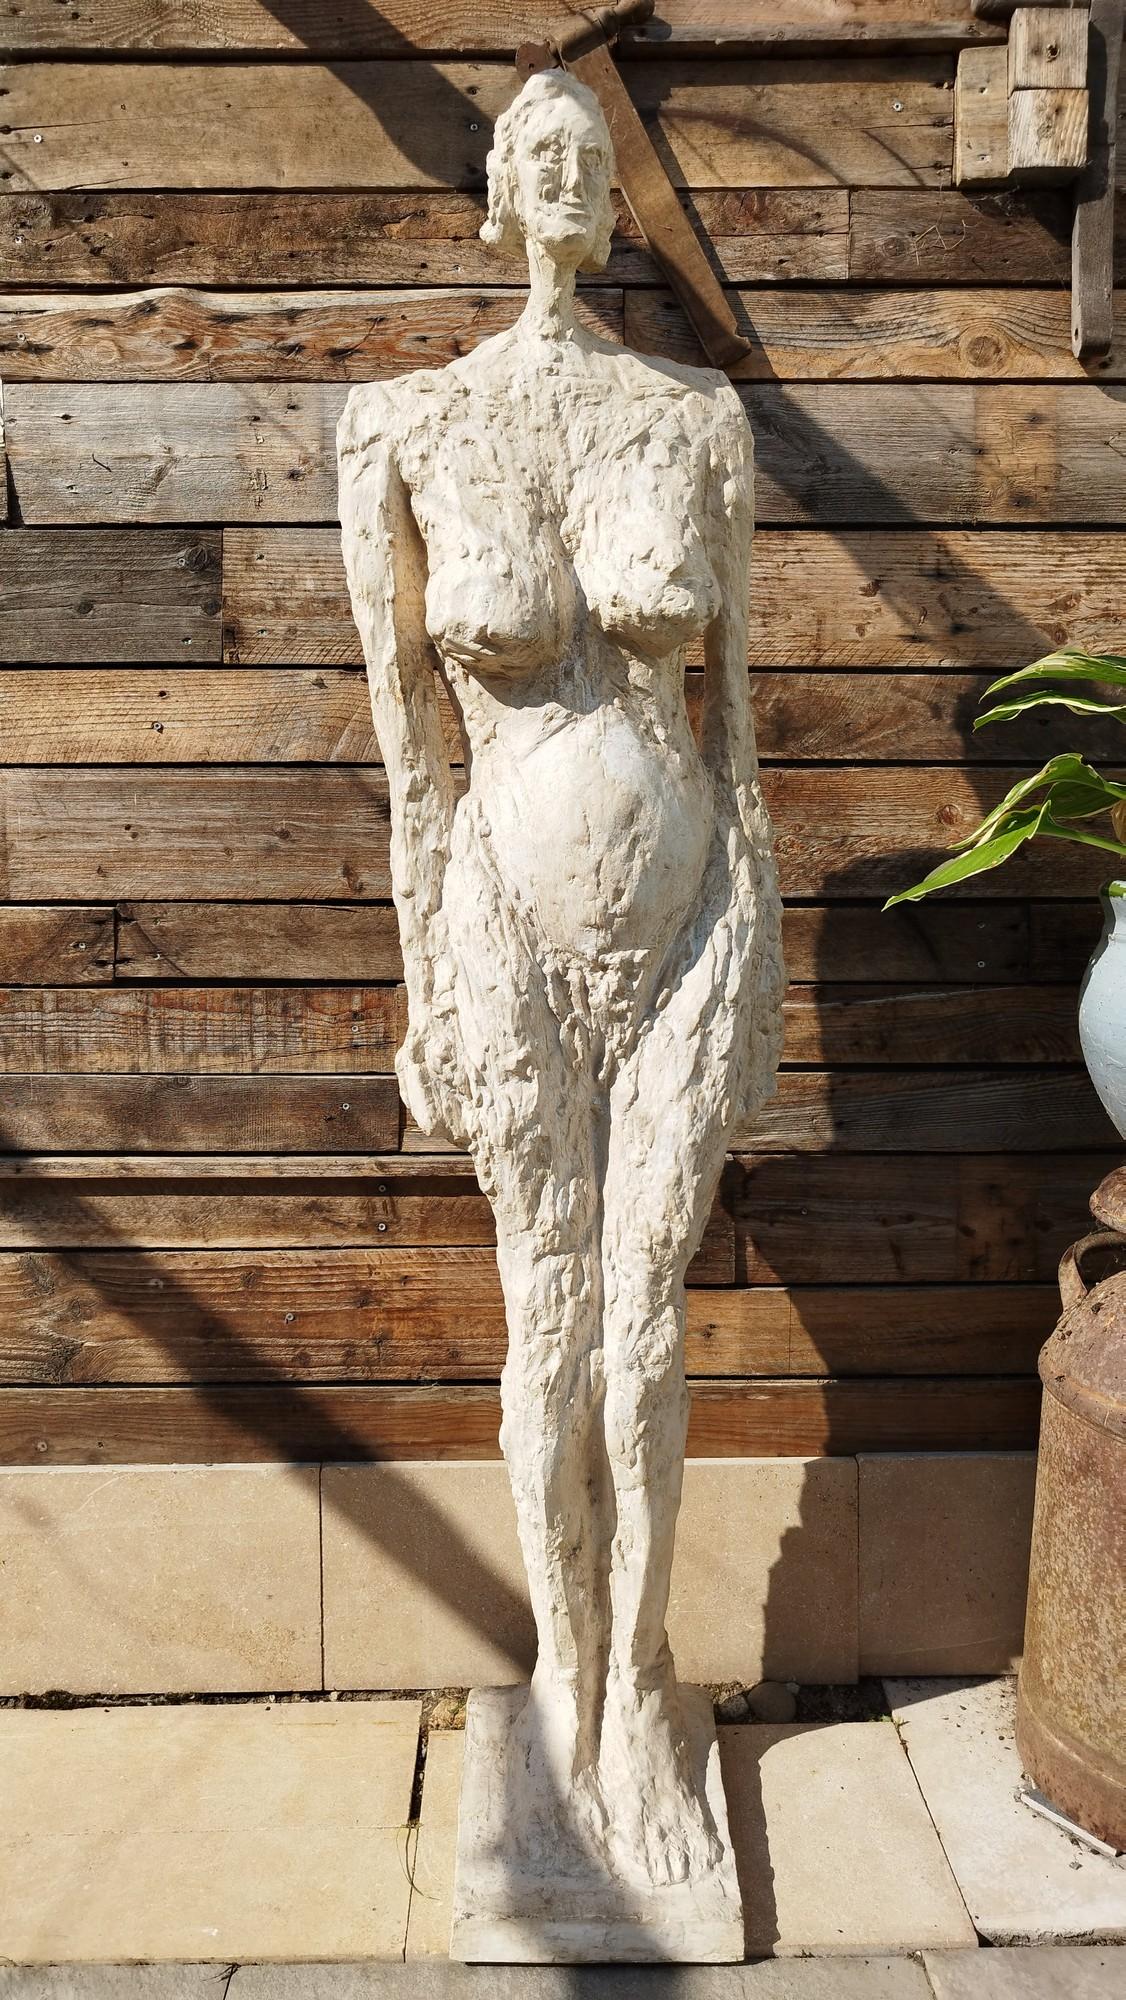 Unique, large-scale, hand-crafted fiberglass statue from the 70's in France, unsigned.
It's existentialist manner is reminiscent of the works by Alberto Giacometti, Robert Couturier, and Germaine Richier. The rough-hewn texture reveals several